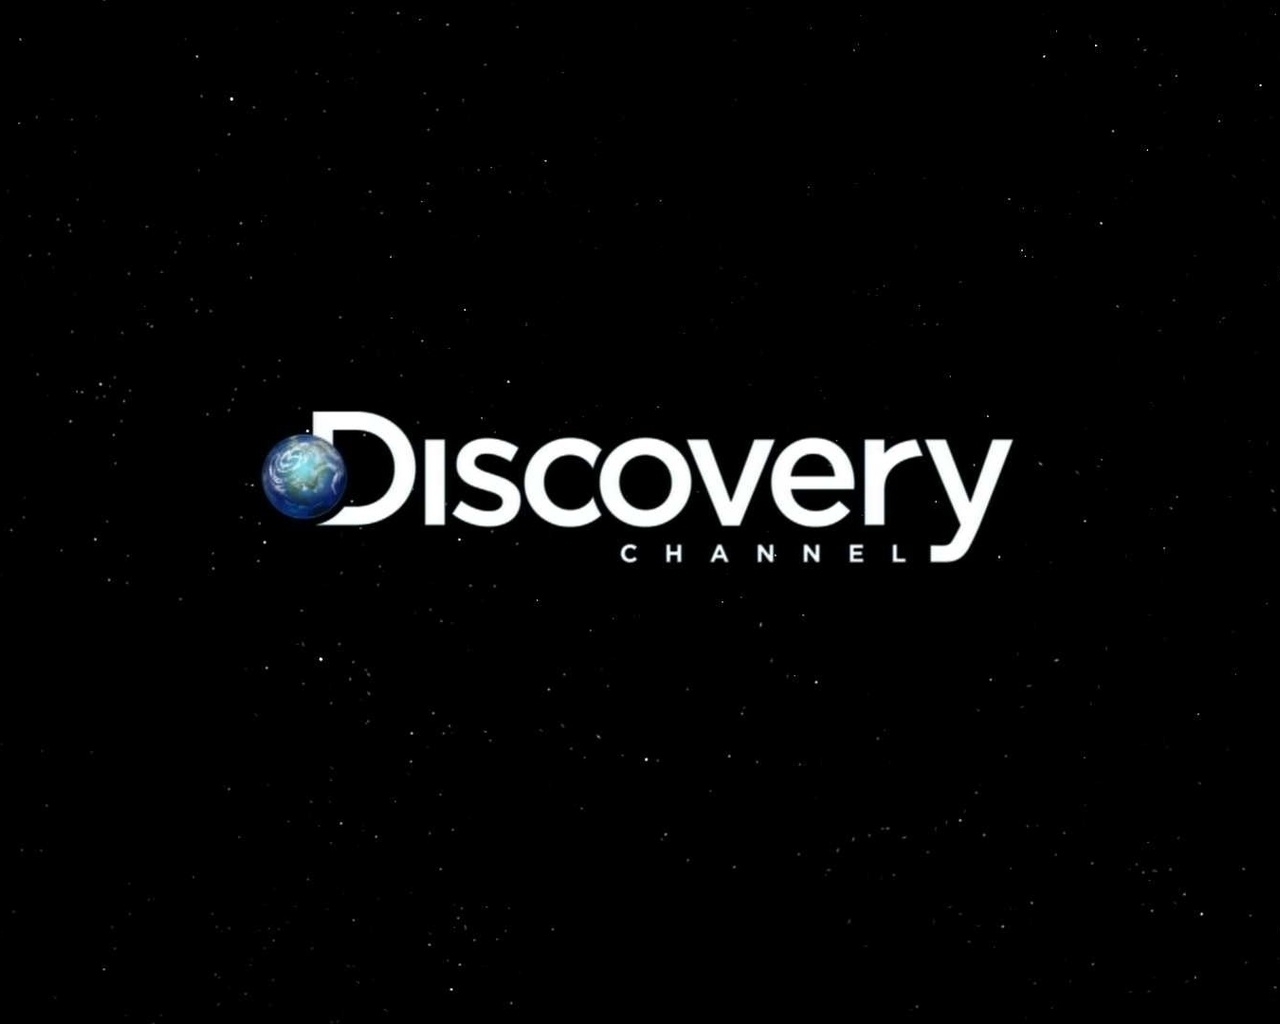 discovery channel, science channel, logo Wallpaper, HD Brands 4K  Wallpapers, Images, Photos and Background - Wallpapers Den